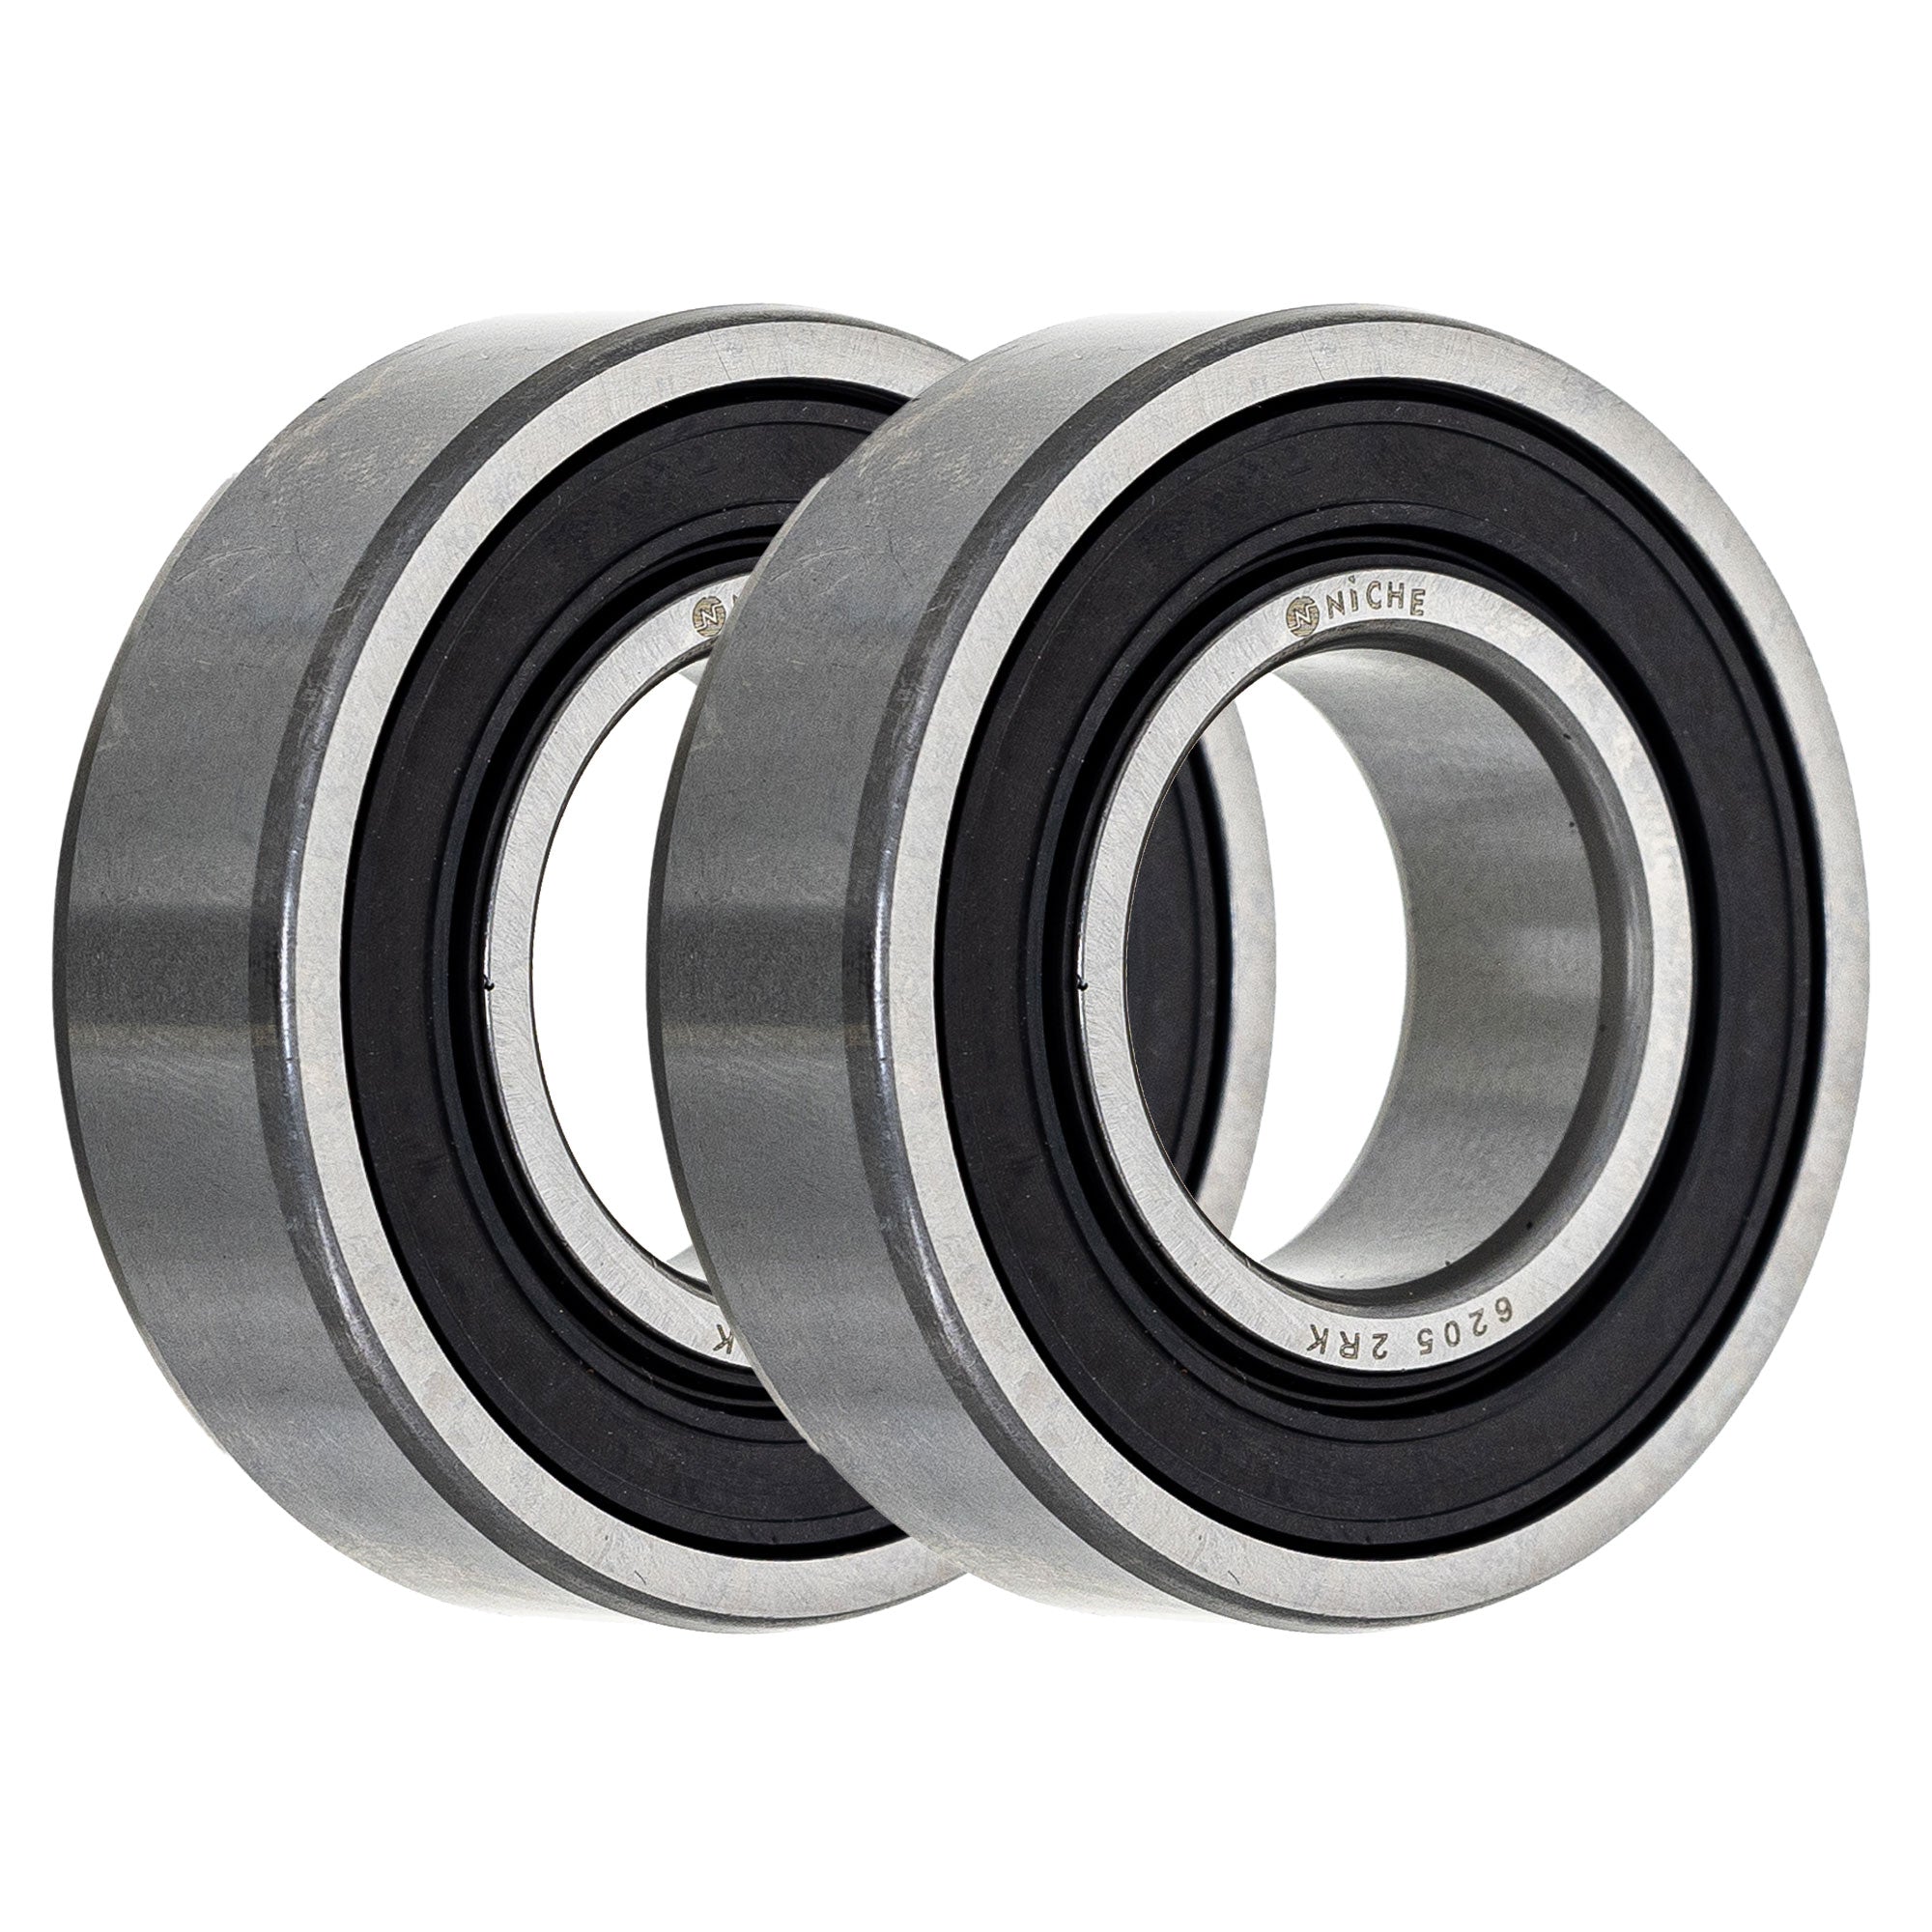 Electric Grade, Single Row, Deep Groove, Ball Bearing Pack of 2 2-Pack for zOTHER Toro NICHE 519-CBB2322R